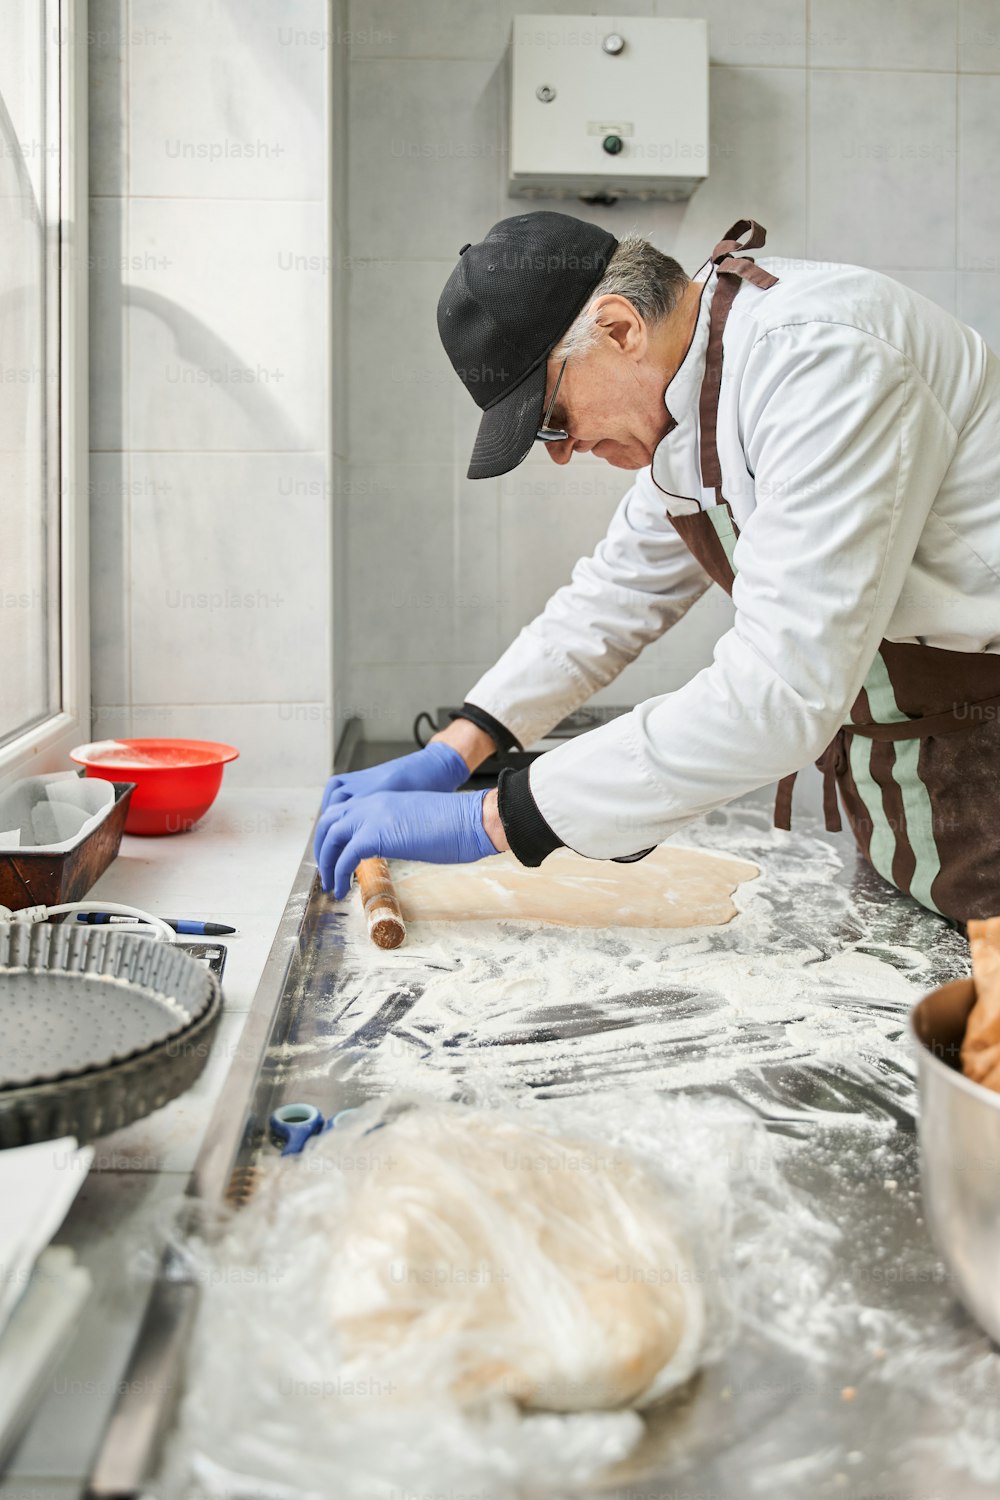 Vertical view of the baker man kneading dough on table with flour and rolling pin while working at the kitchen. Cooking at baker house at the work concept. Stock photo